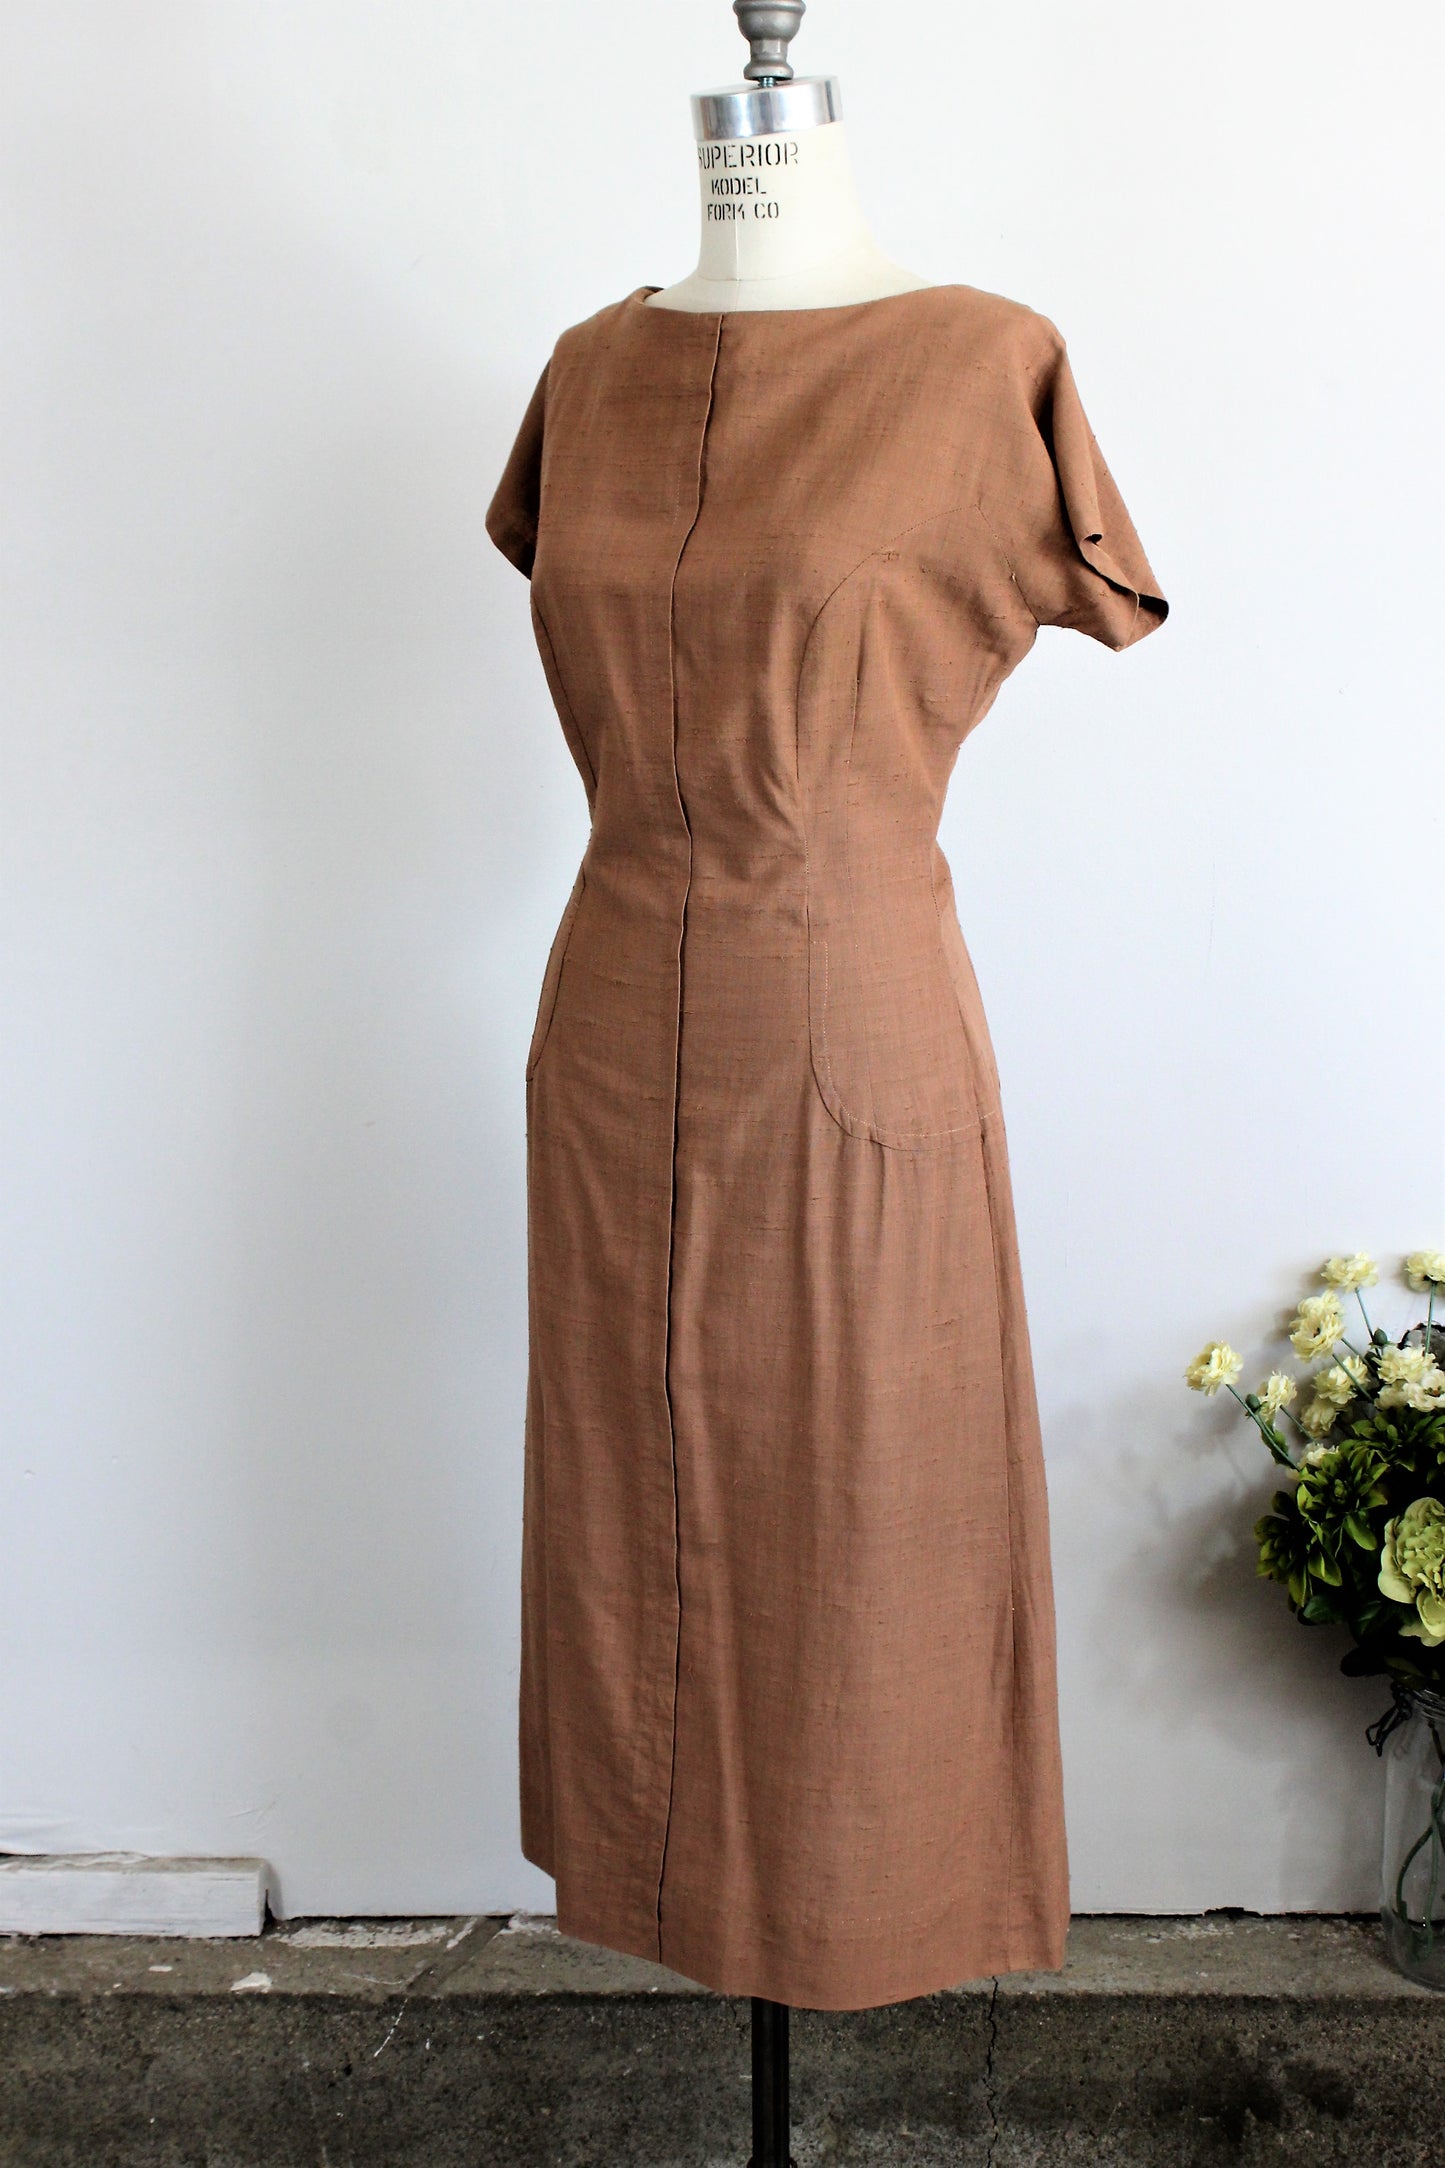 Vintage 1950s Brown Day Dress in Milk Chocolate Brown from Tall Fashions of California By Martin Berens 